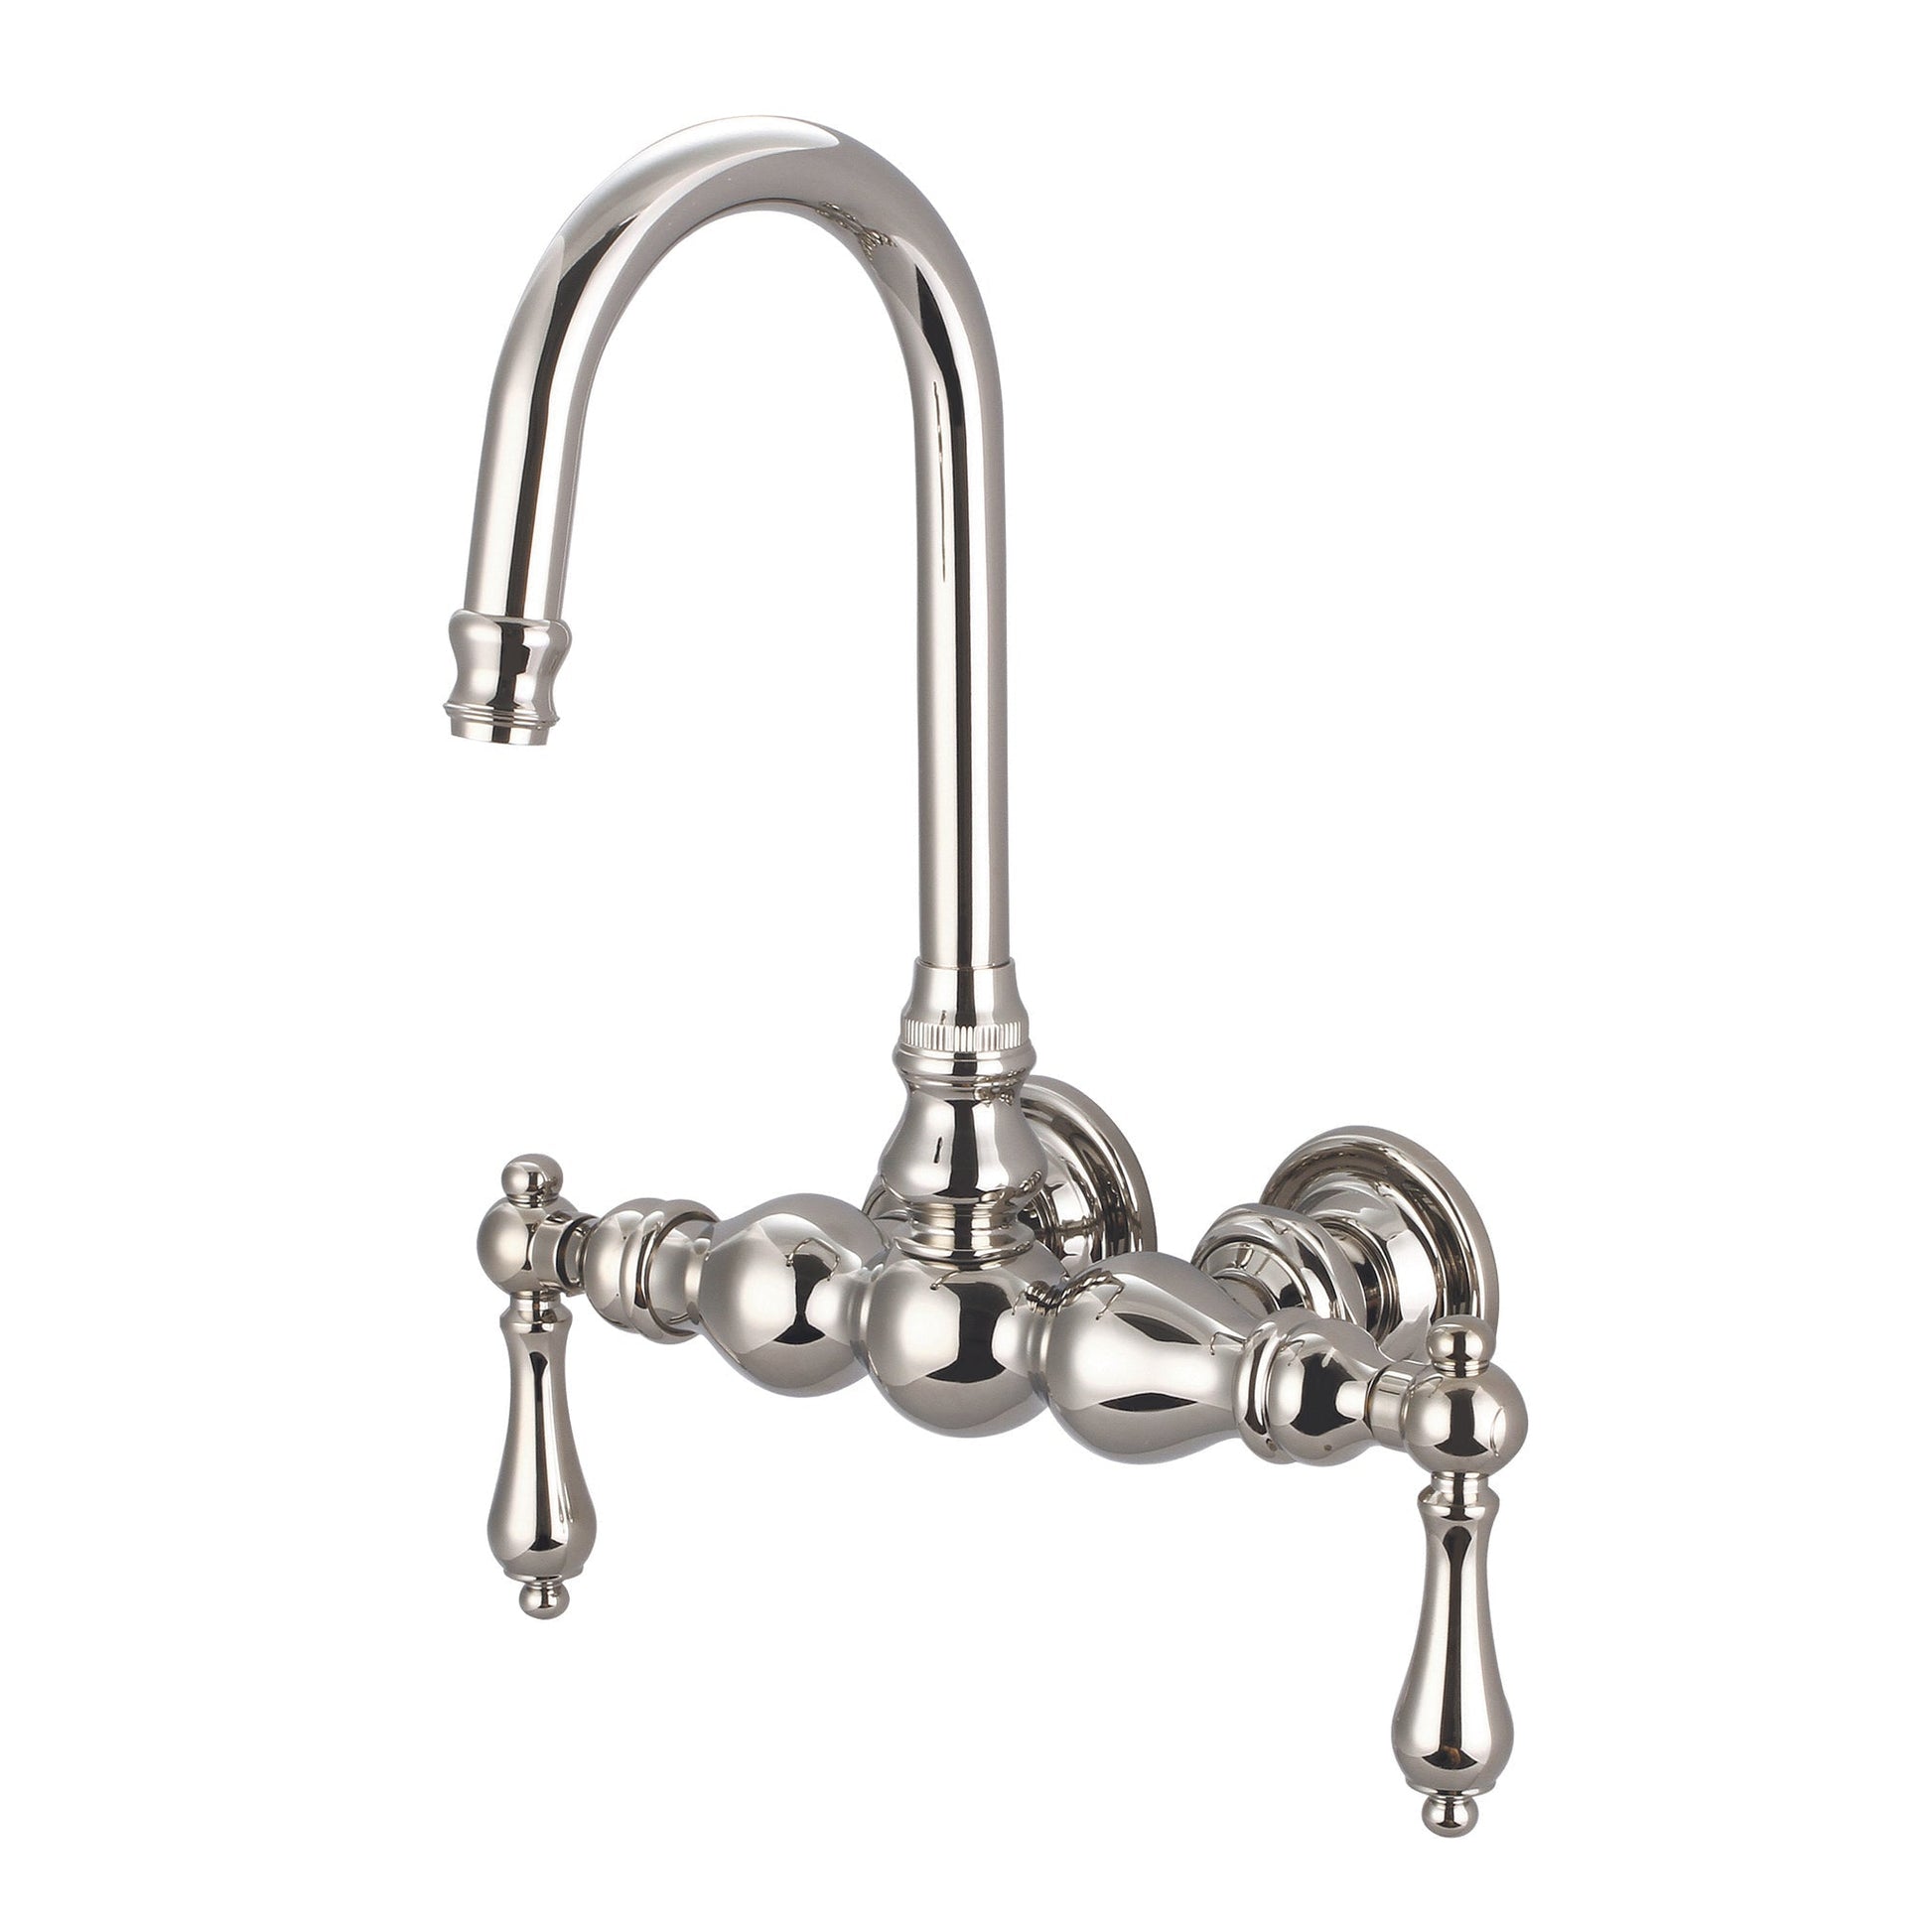 Water Creation Vintage Classic Center Wall Mount Tub F6-0014 9.25" Ivory Solid Brass Faucet With Gooseneck Spout And Straight Wall Connector And Metal Lever Handles Without Labels